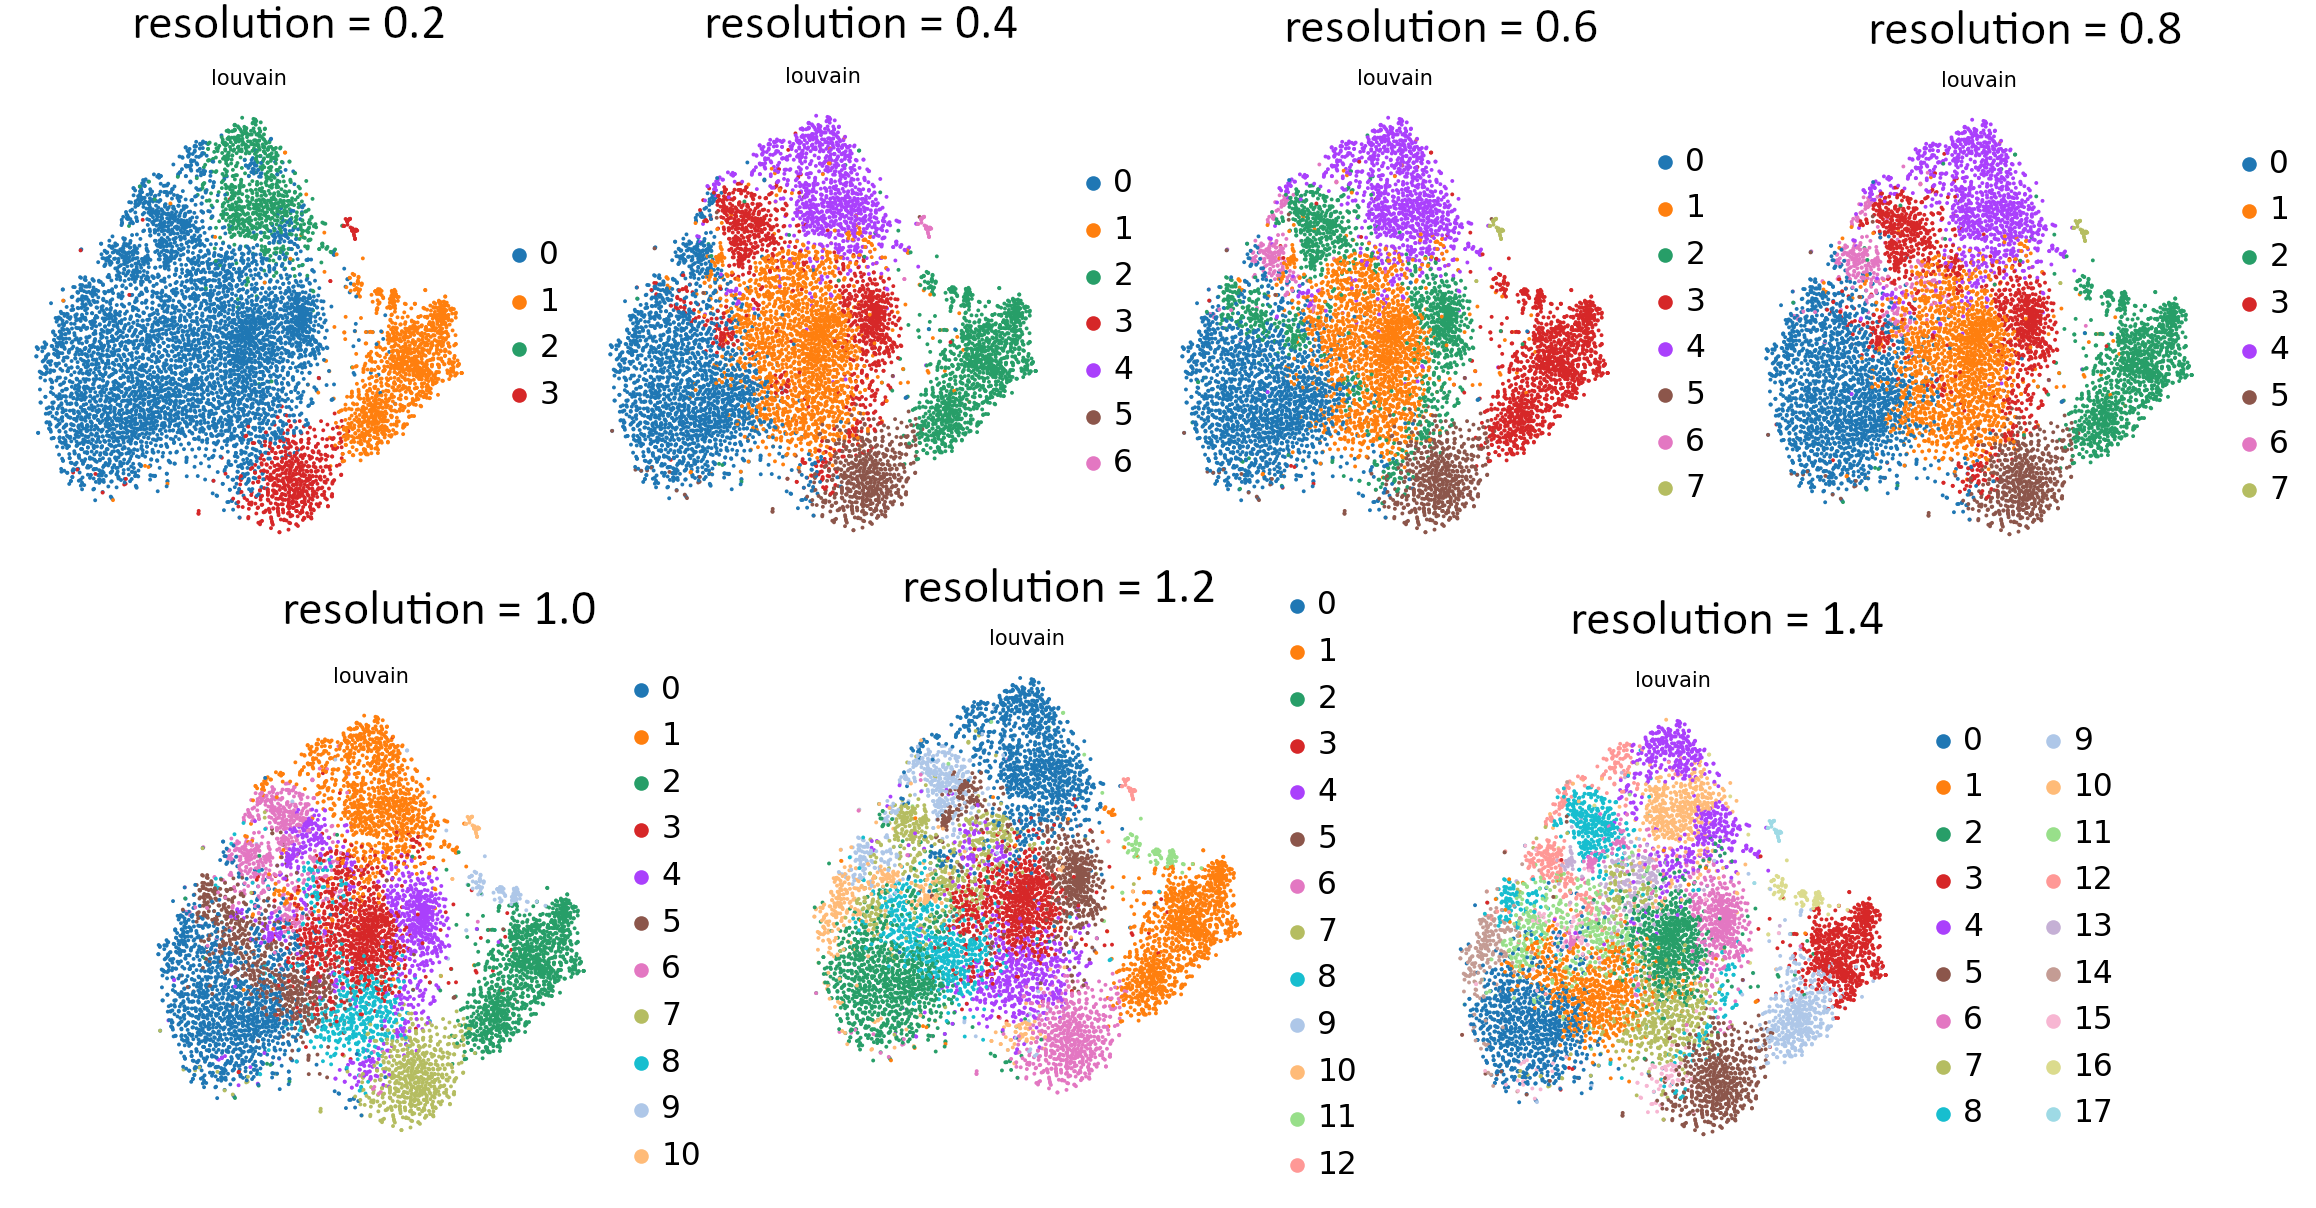 Graphs showing the differences between tSNE embeddings caused by different values of resolution.